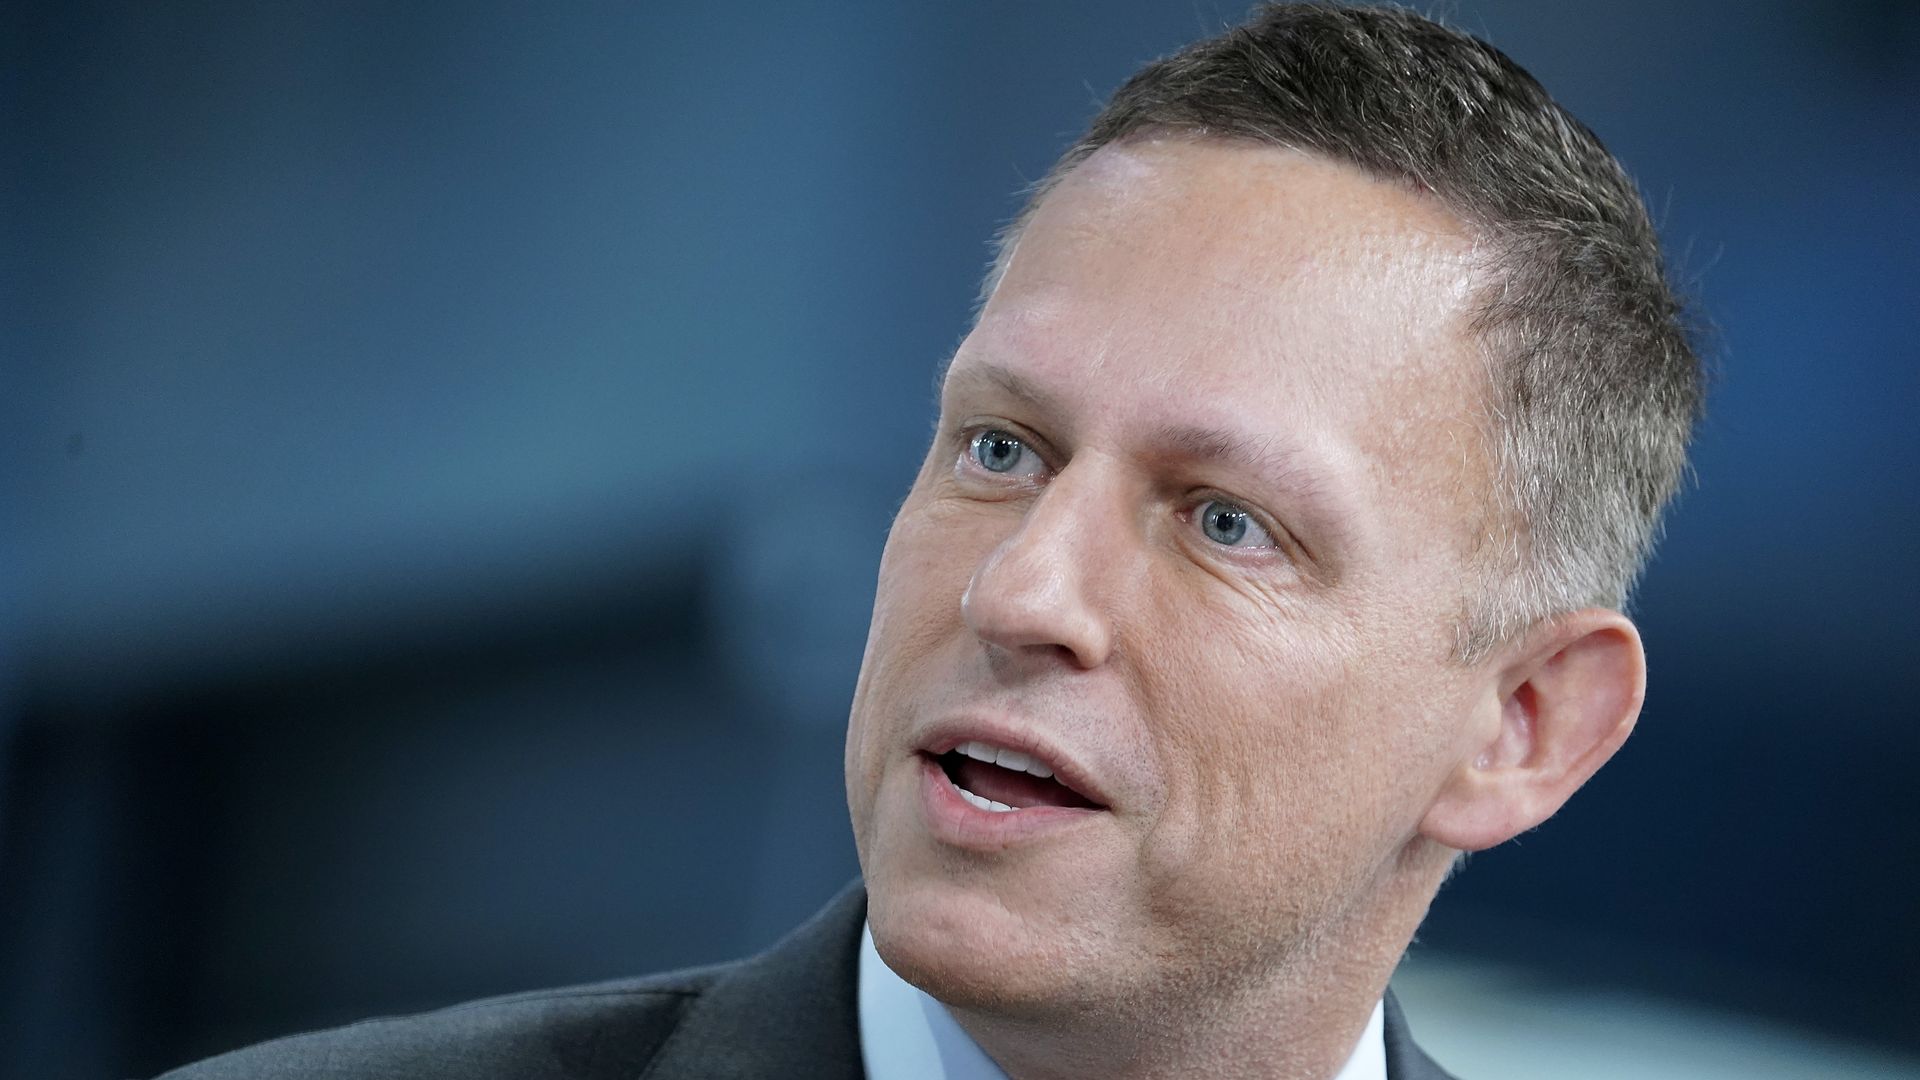 In this image, Peter Thiel wears a tie and suit and talks